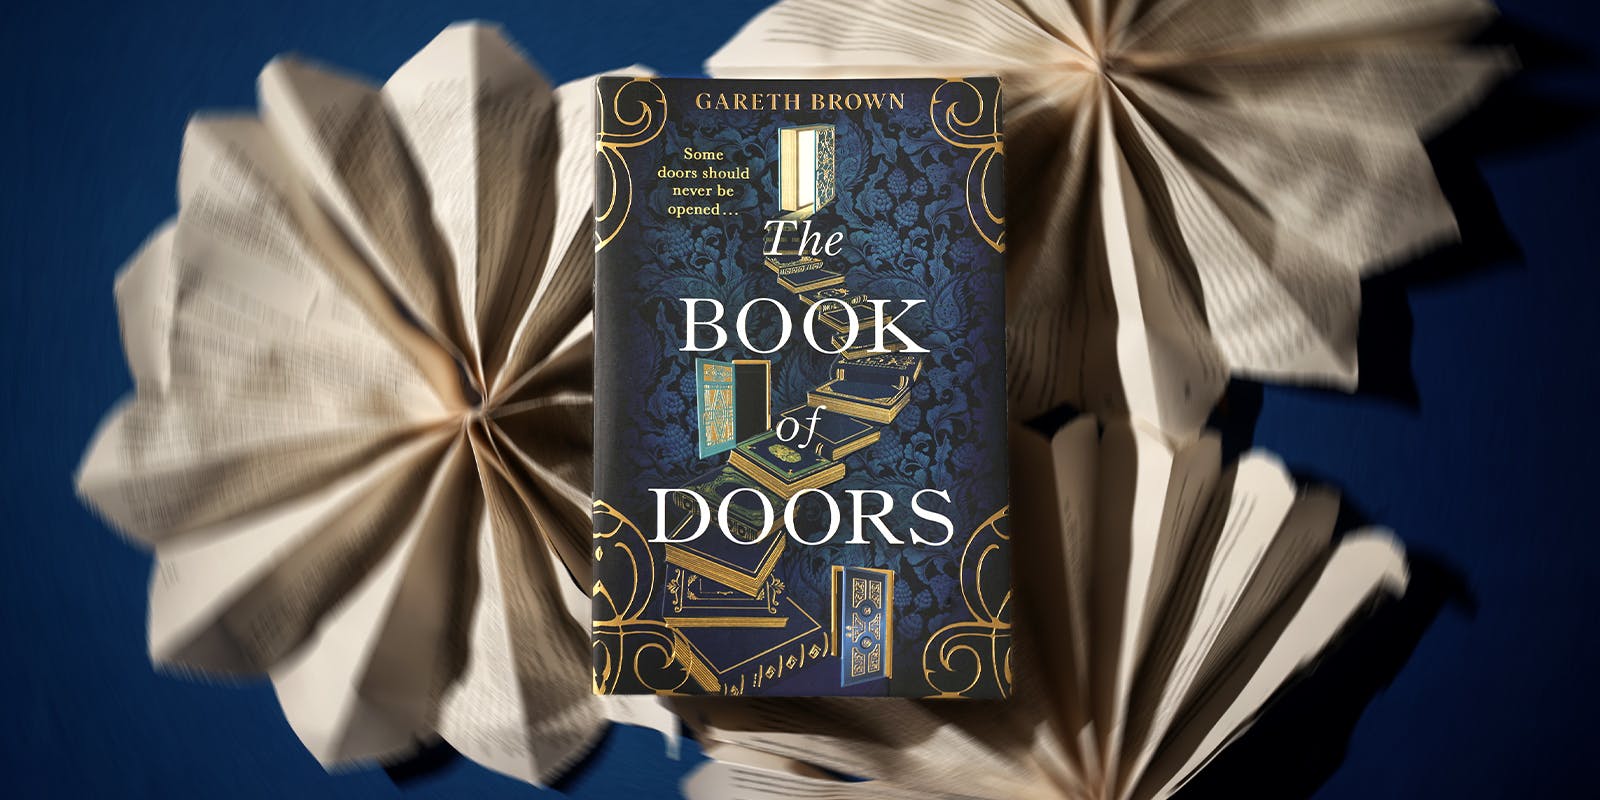 Gareth Brown shares how a yearning to travel inspired The Book of Doors